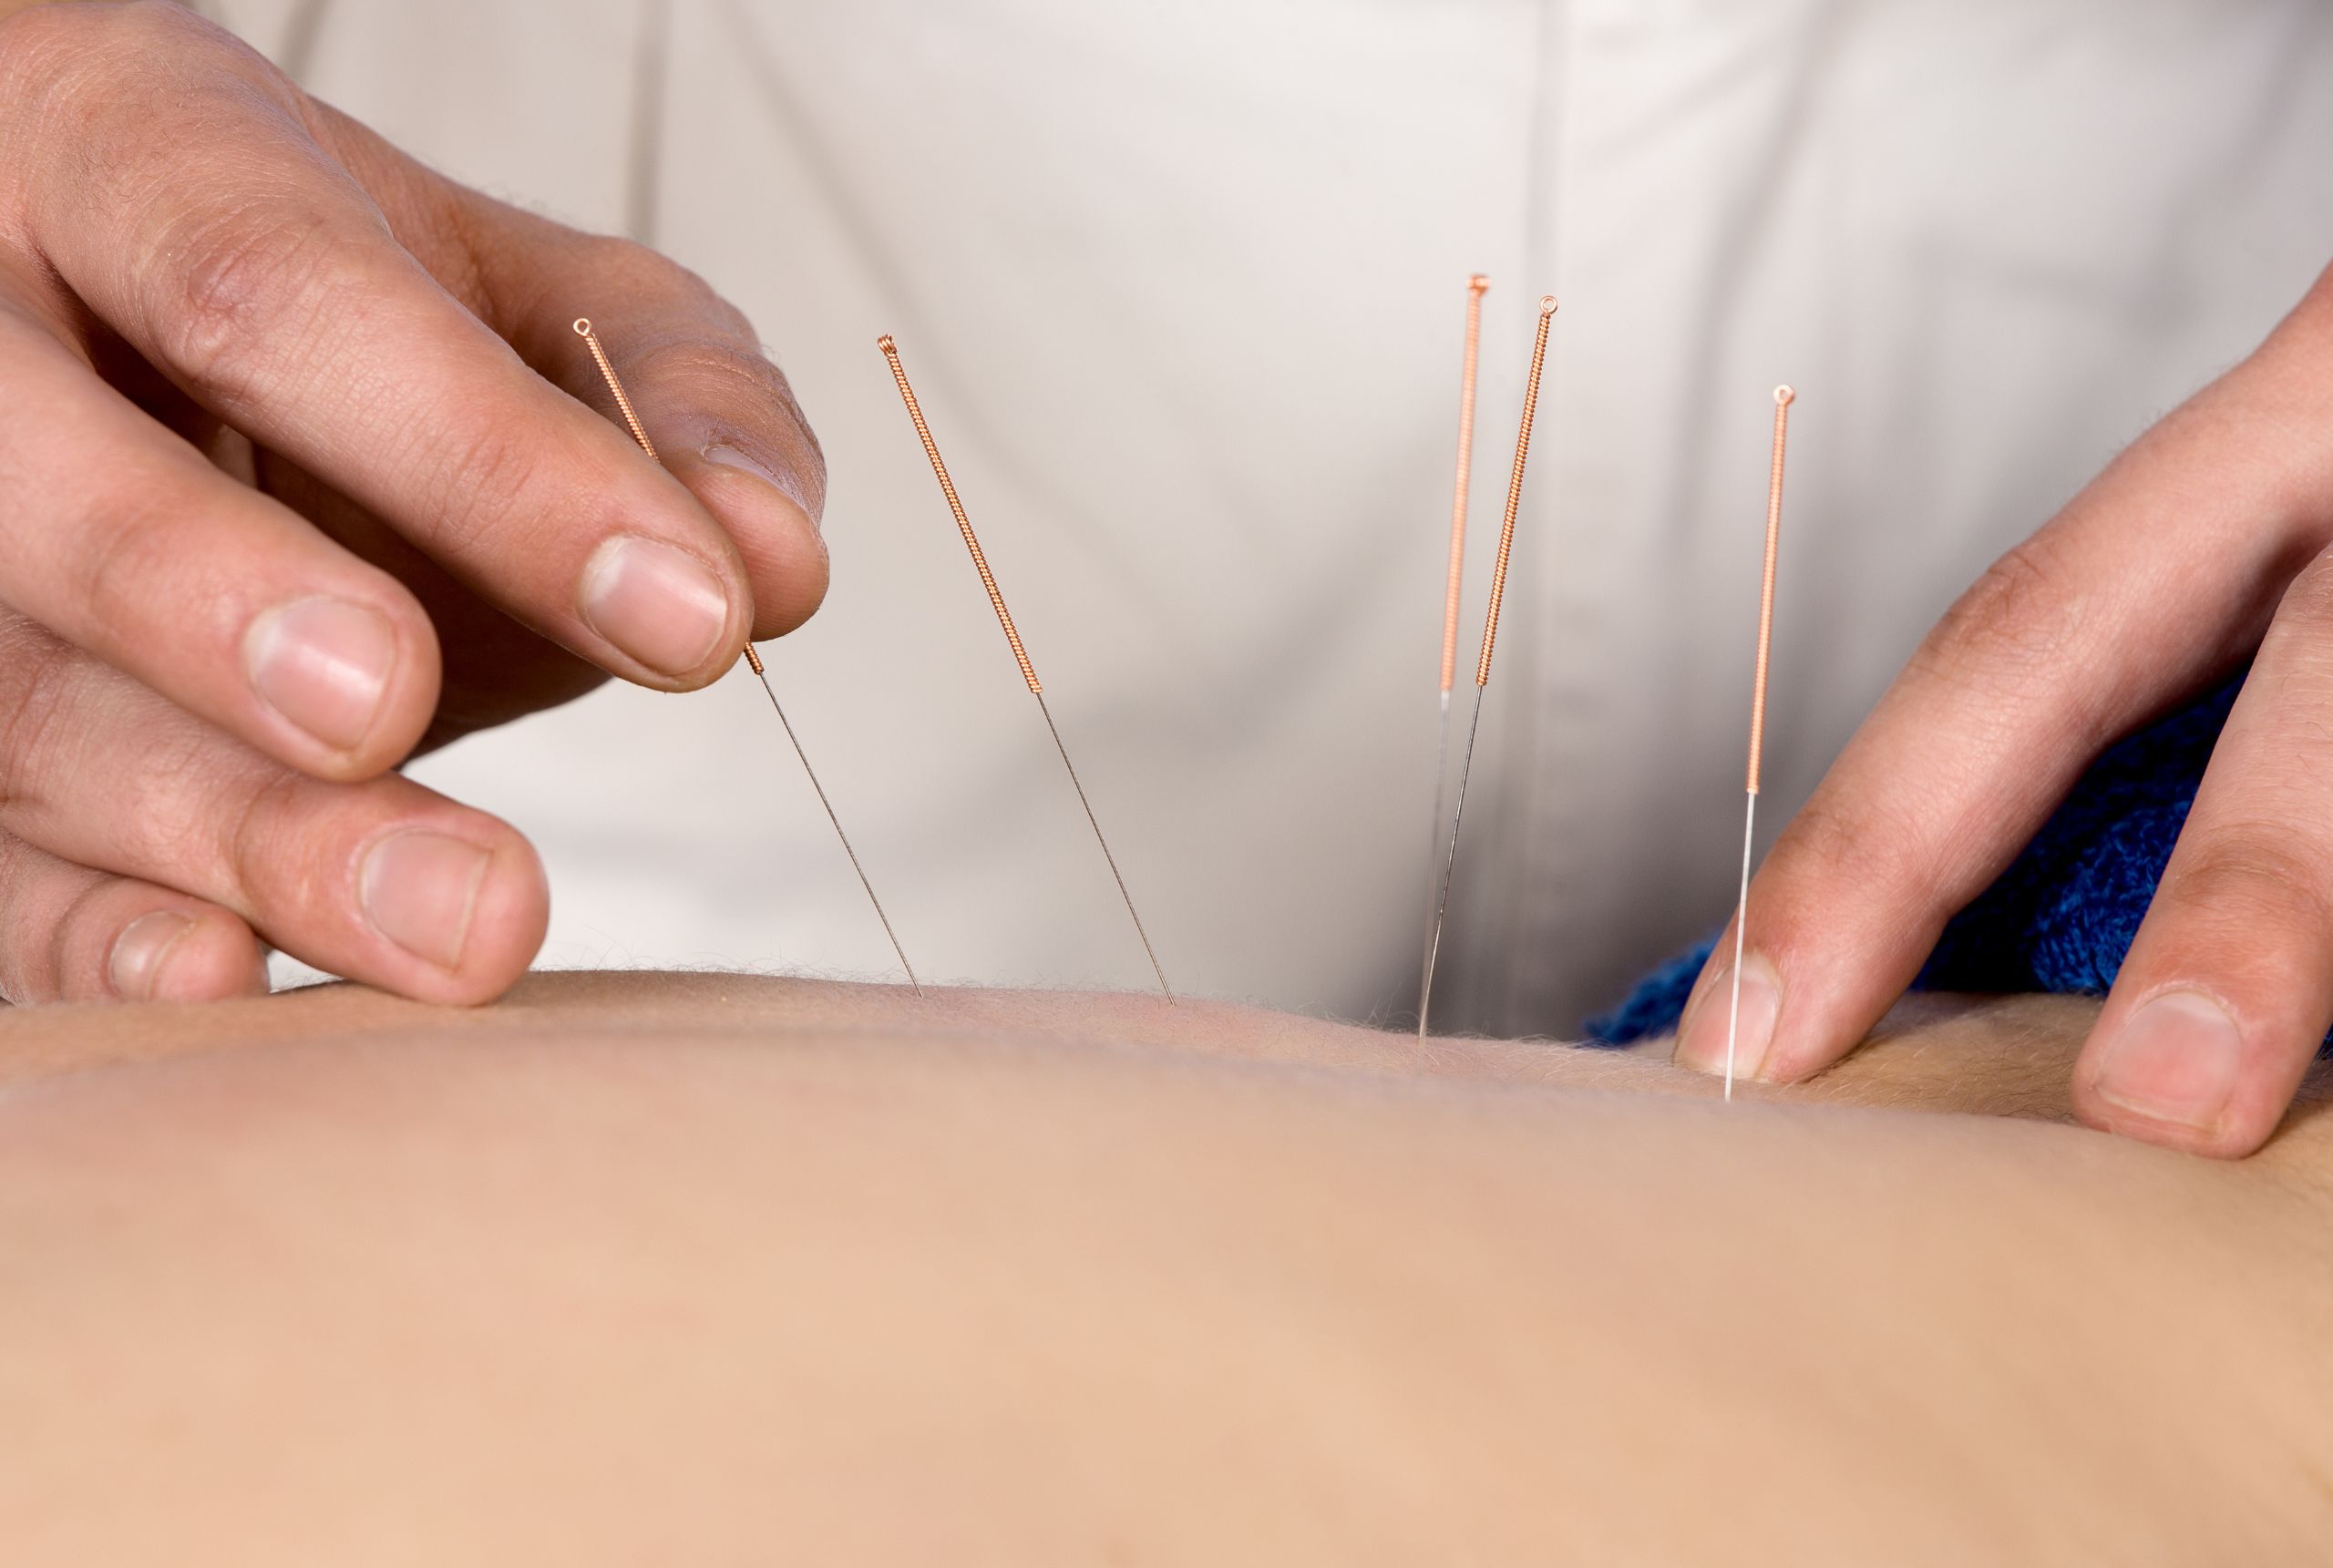 close-up of a hand placing acupuncture needles into skin